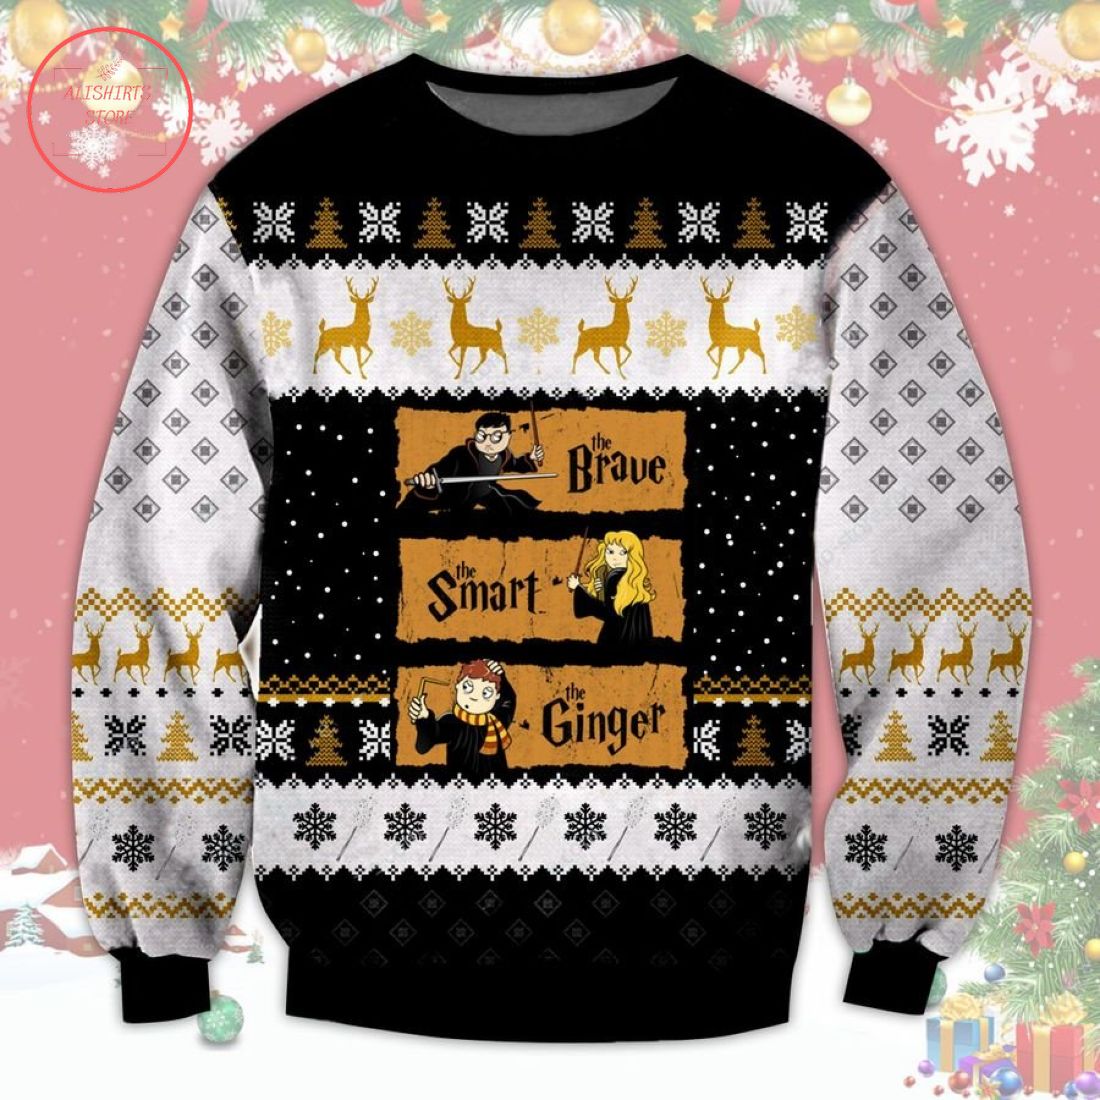 Harry Potter and Magical Friends Christmas Sweater in white and black, with Harry Potter and Friends printed in the center of the front.